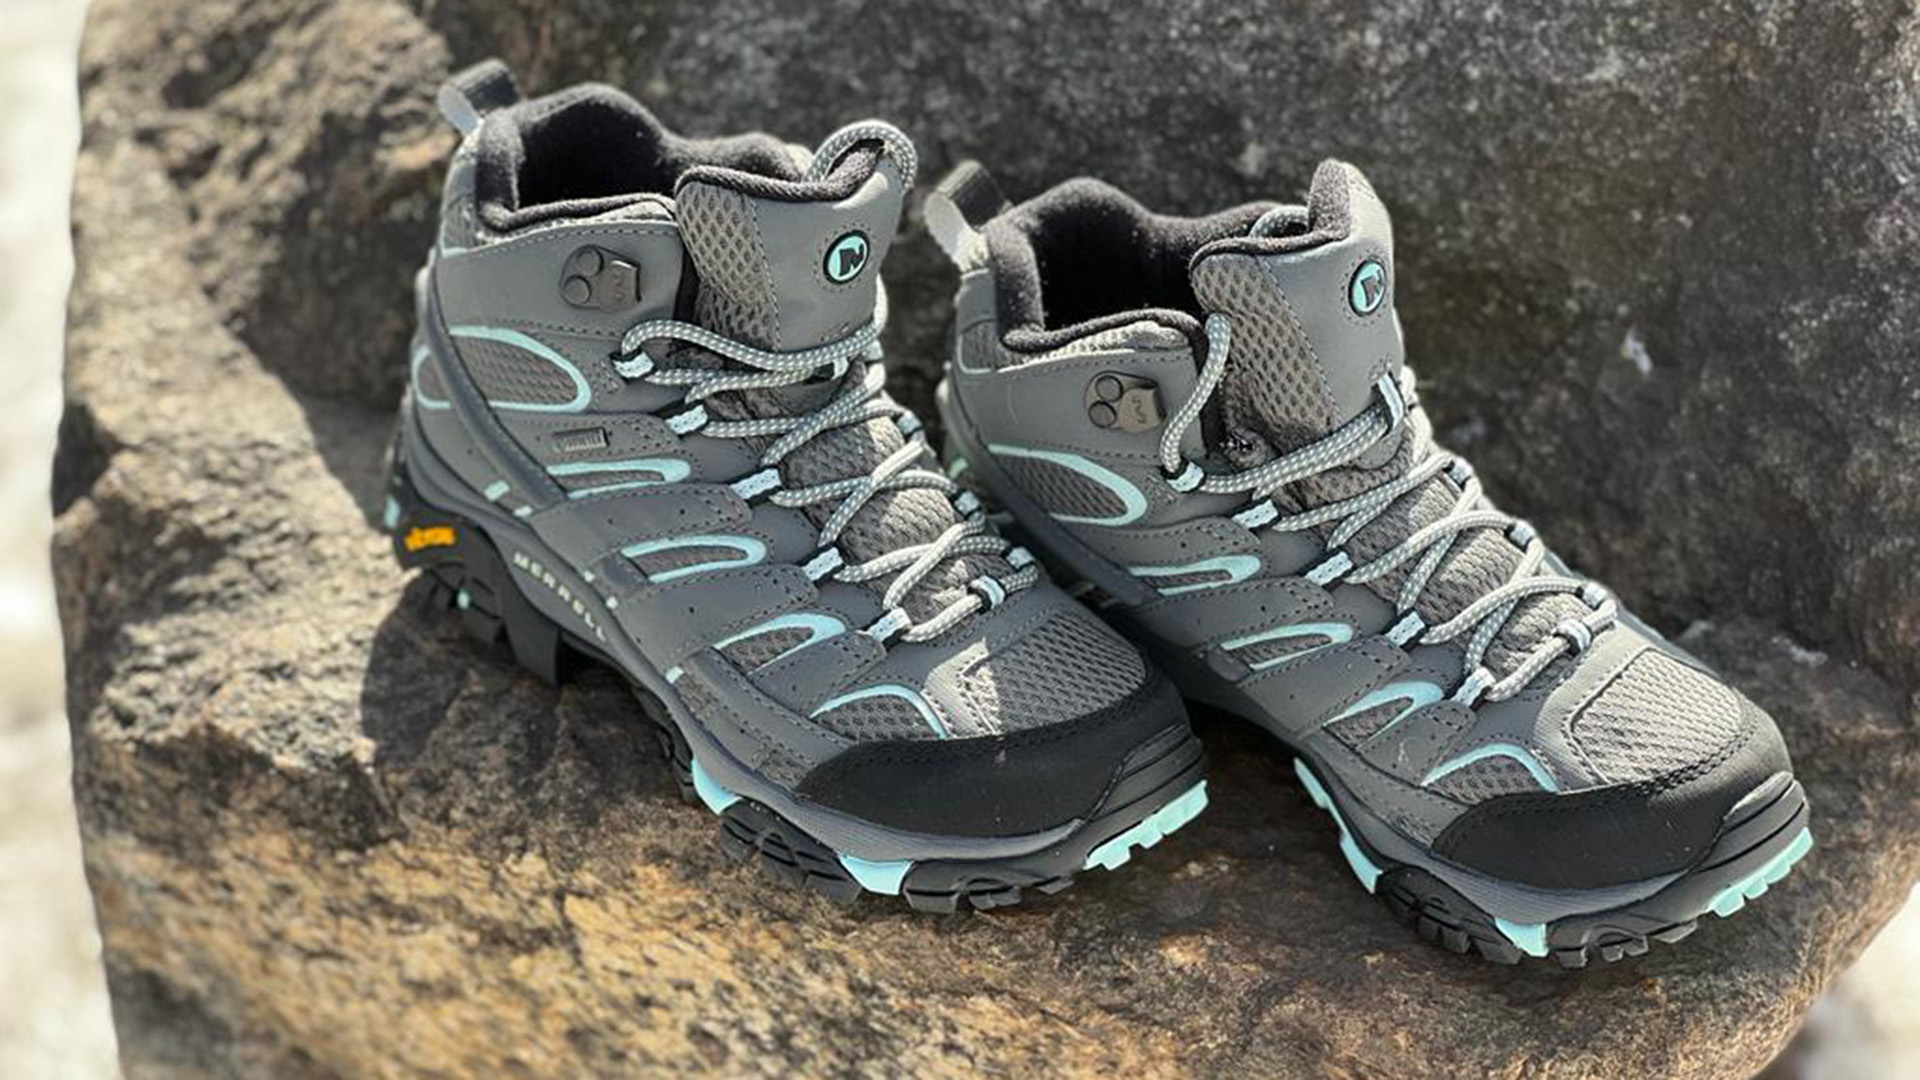 Merrell Women's Moab 2 Mid Gore-Tex review: A reliable all-rounder